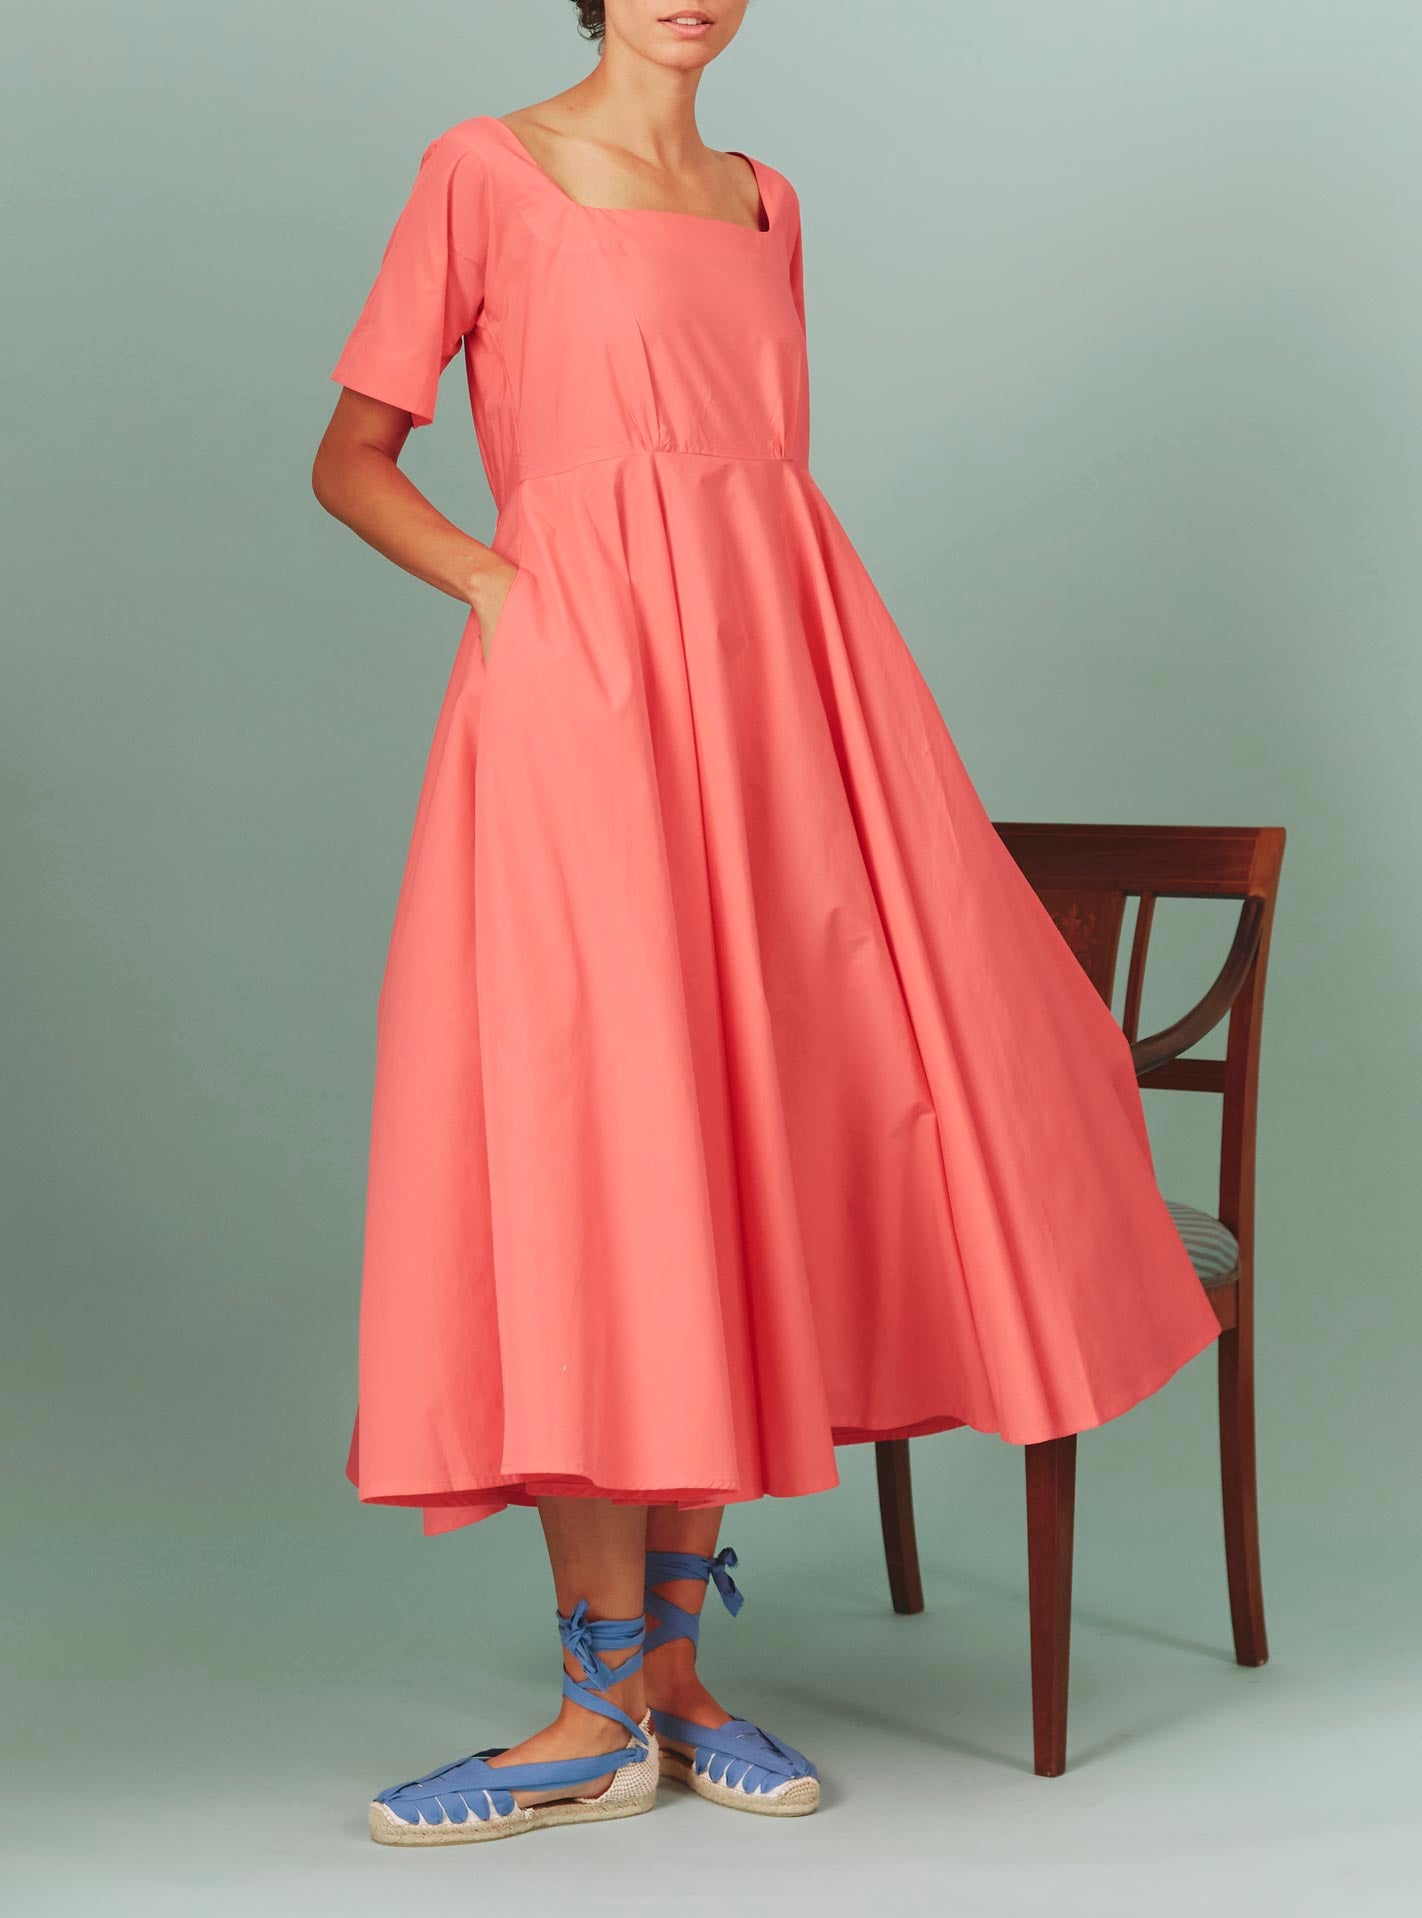 Front view of Allegria Dress: Matisse Plain Poplin in Watermelon by Thierry Colson